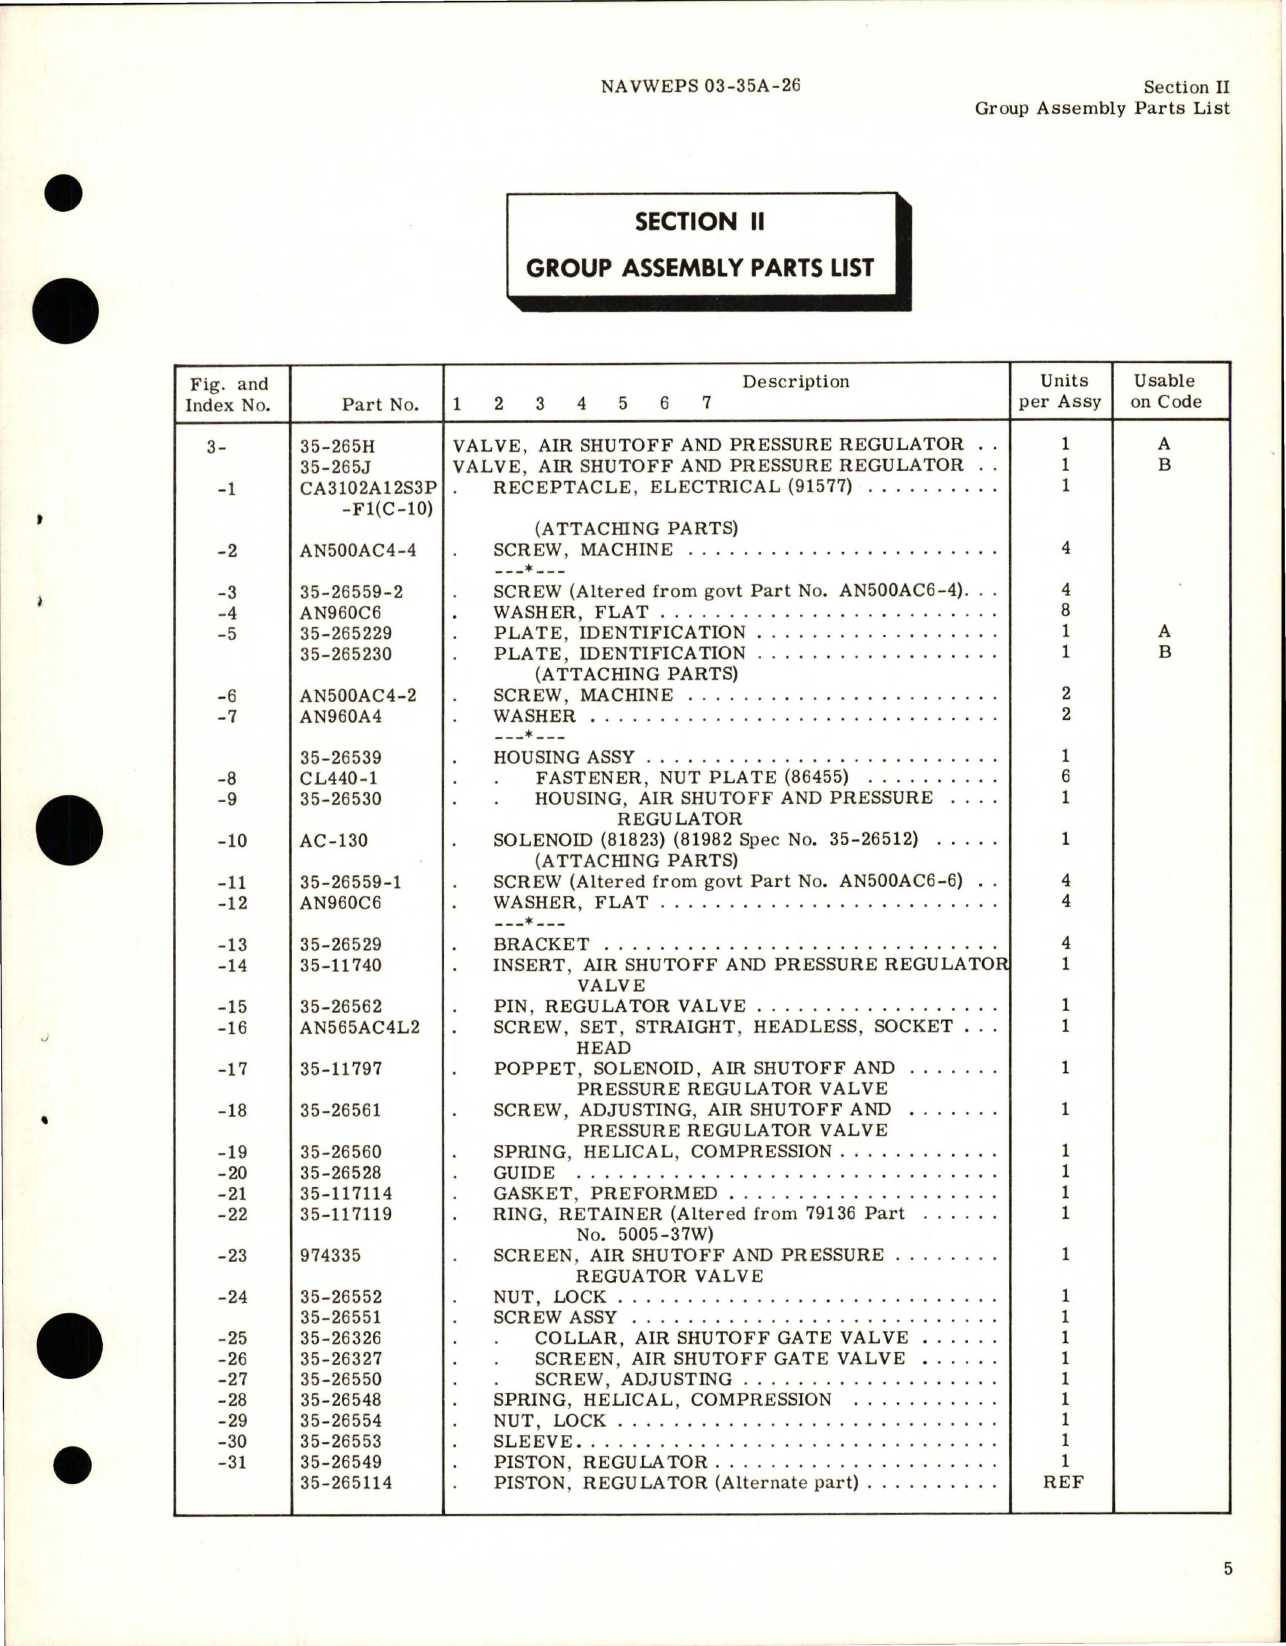 Sample page 7 from AirCorps Library document: Illustrated Parts Breakdown for Air Shutoff and Pressure Regulator Valves - Parts 35-265H, and 35-265J